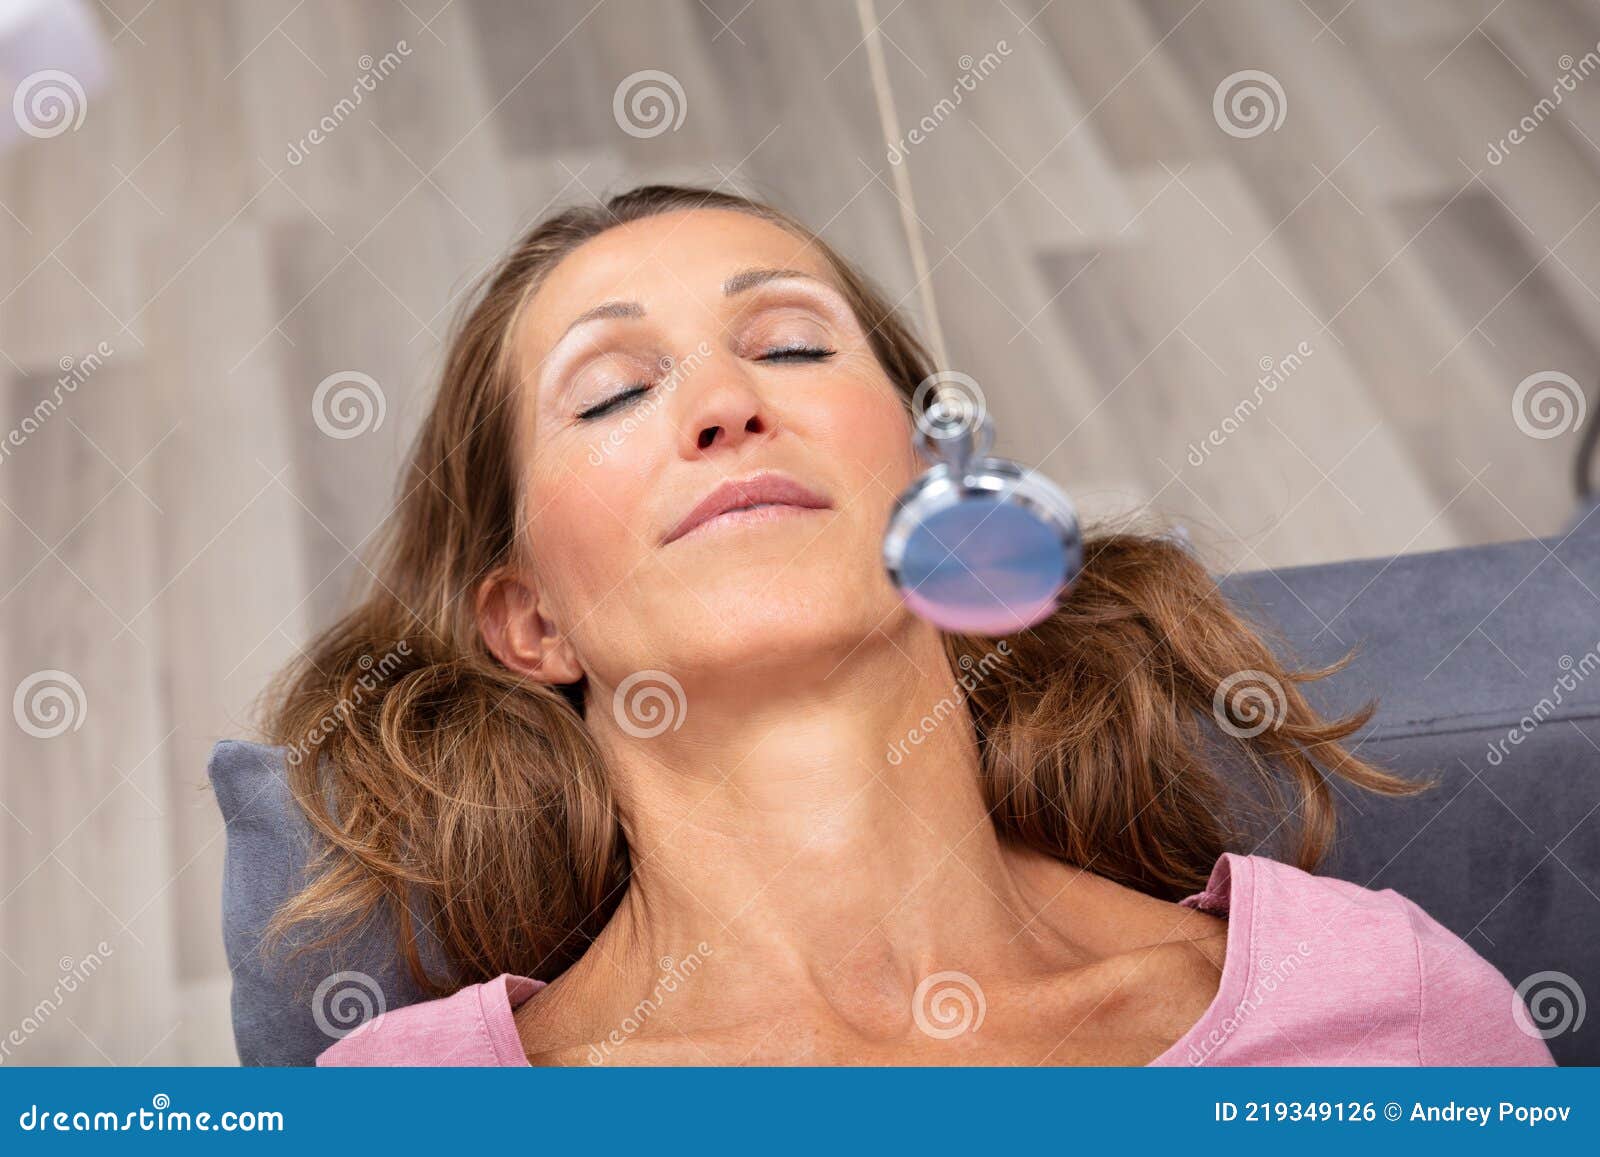 woman being hypnotized while lying on sofa